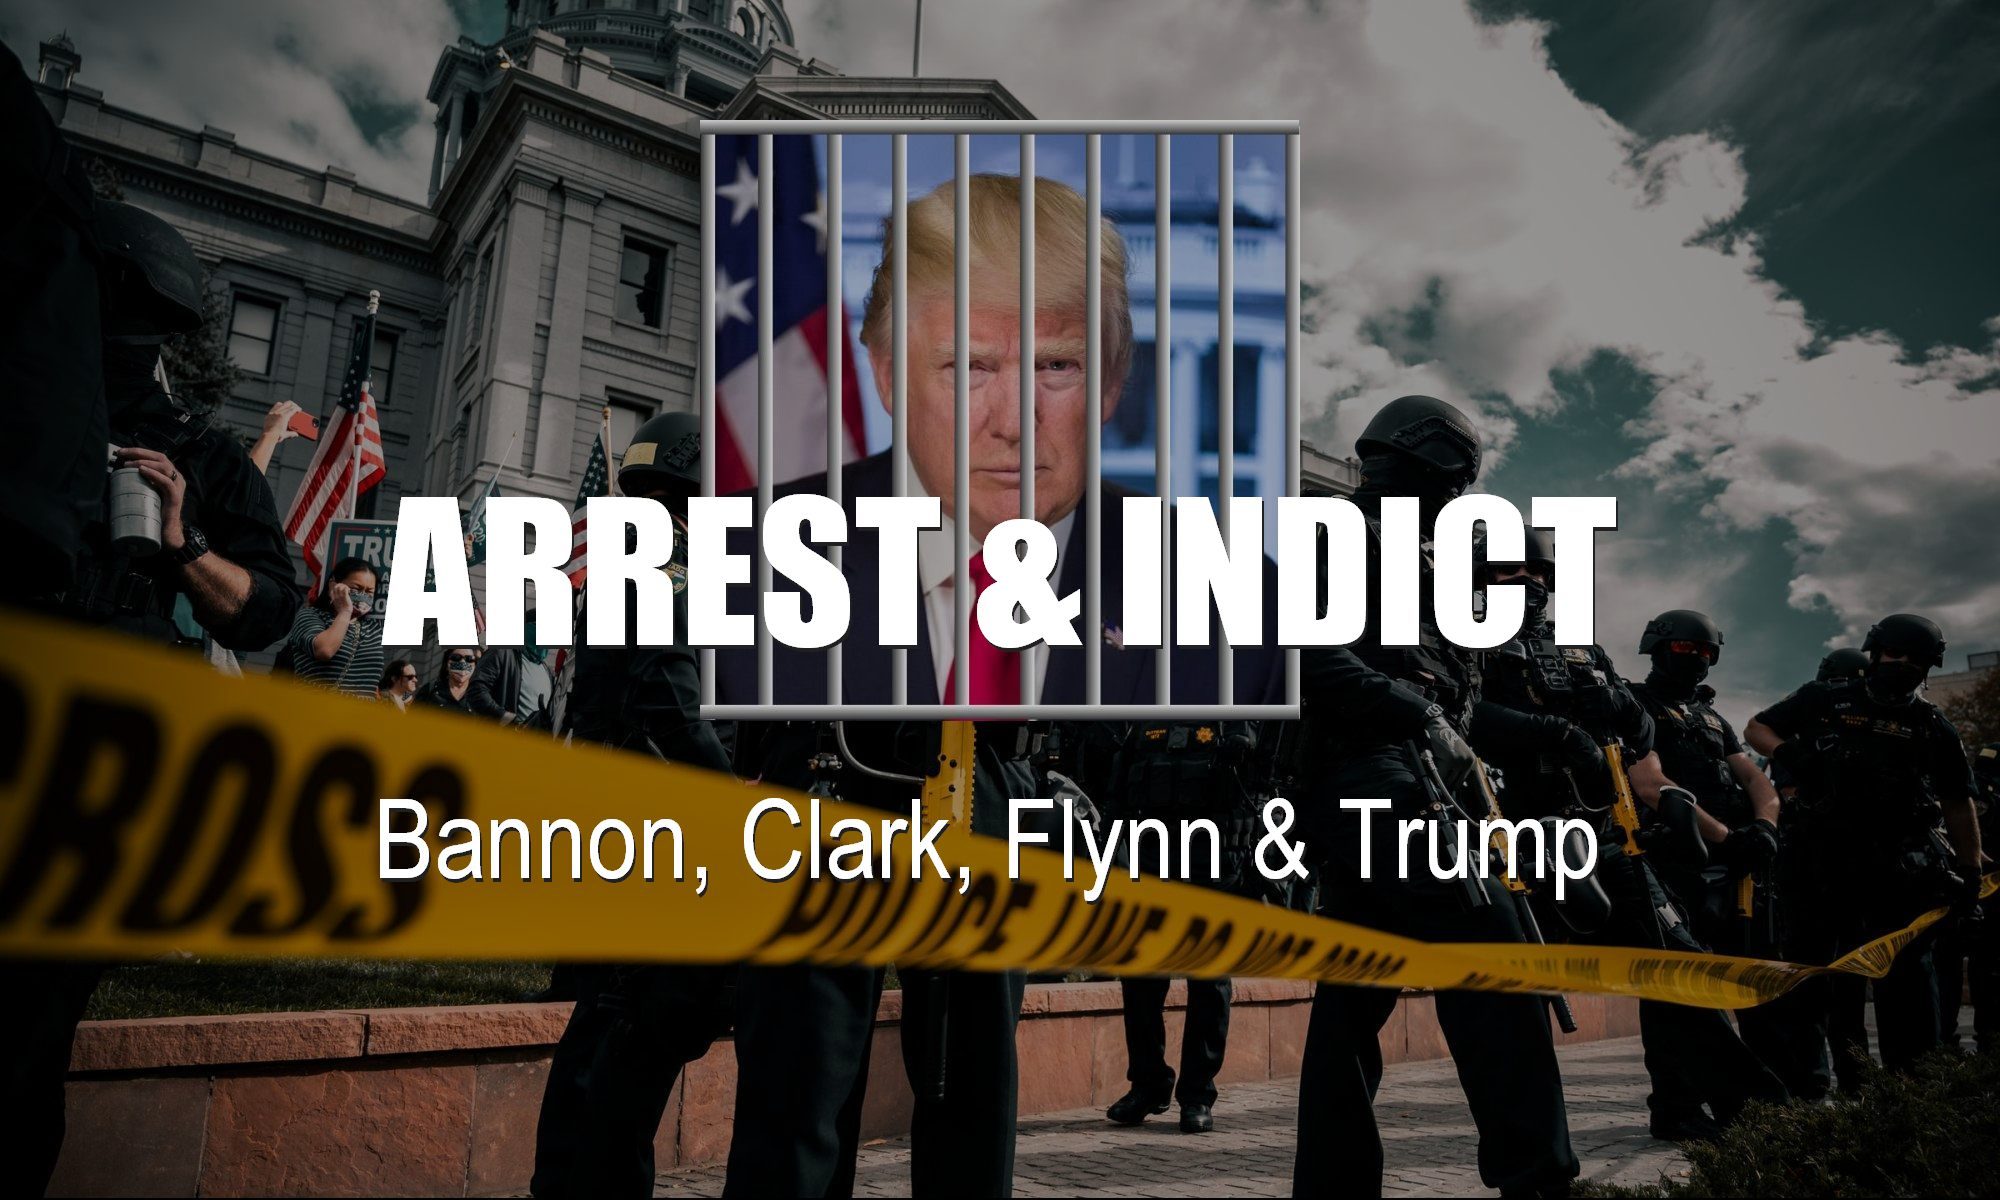 why hasnt doj garland prosecuted for contempt of congress arrest indict steve bannon clark flynn trump now